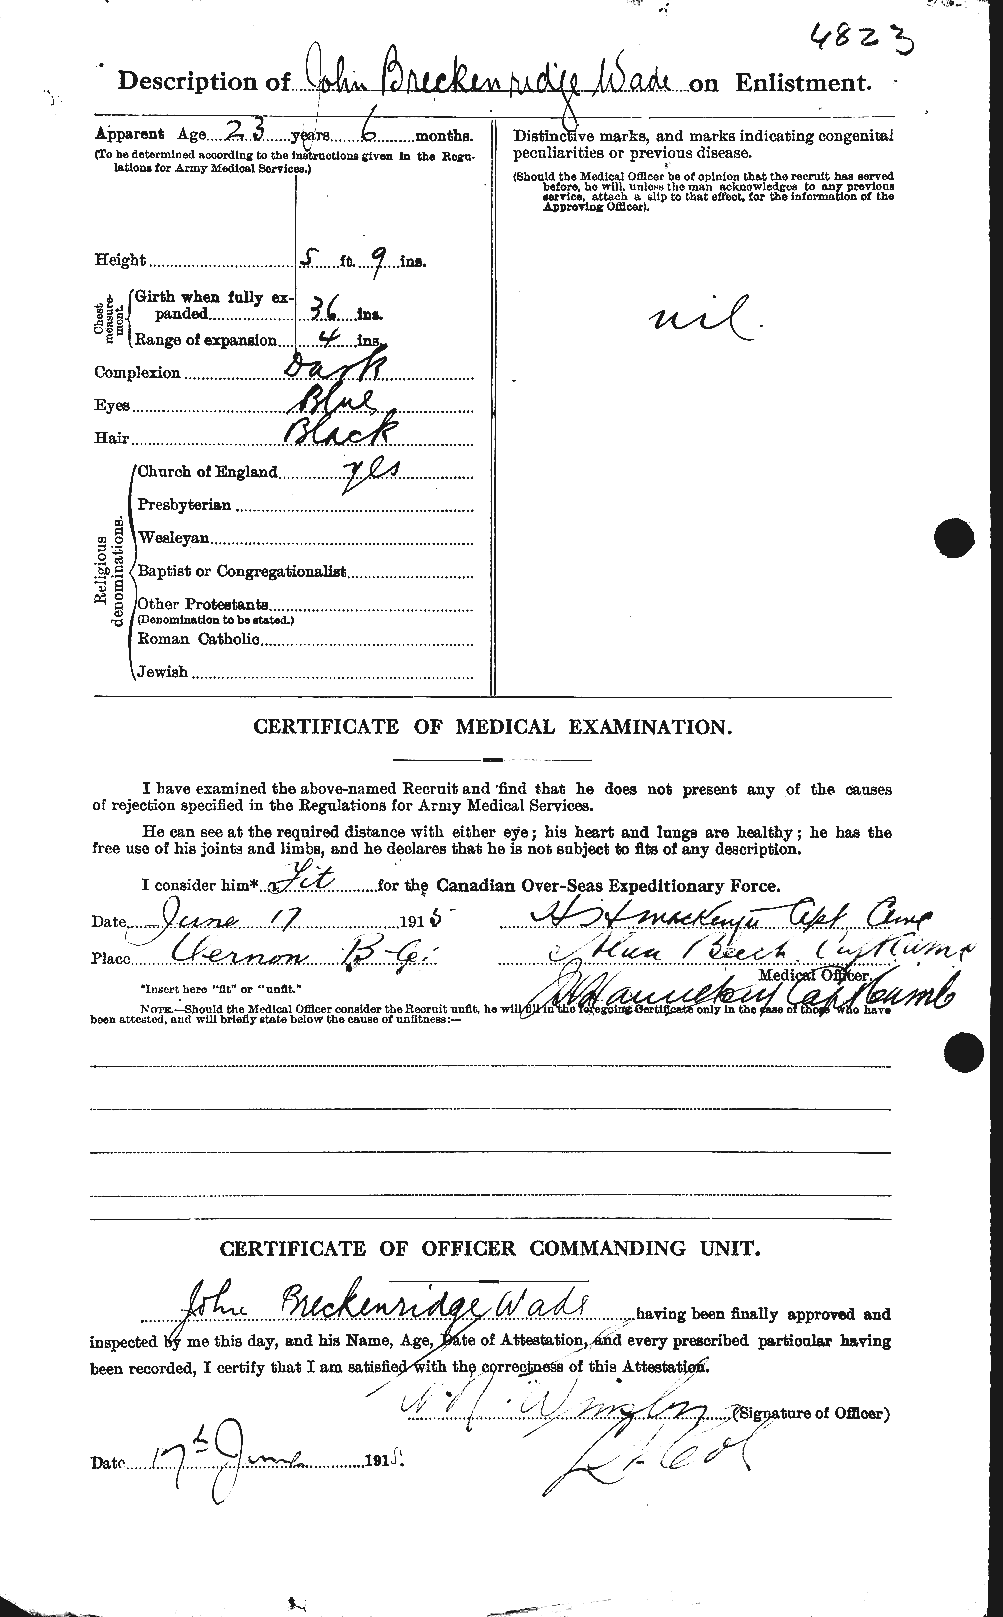 Personnel Records of the First World War - CEF 651264b